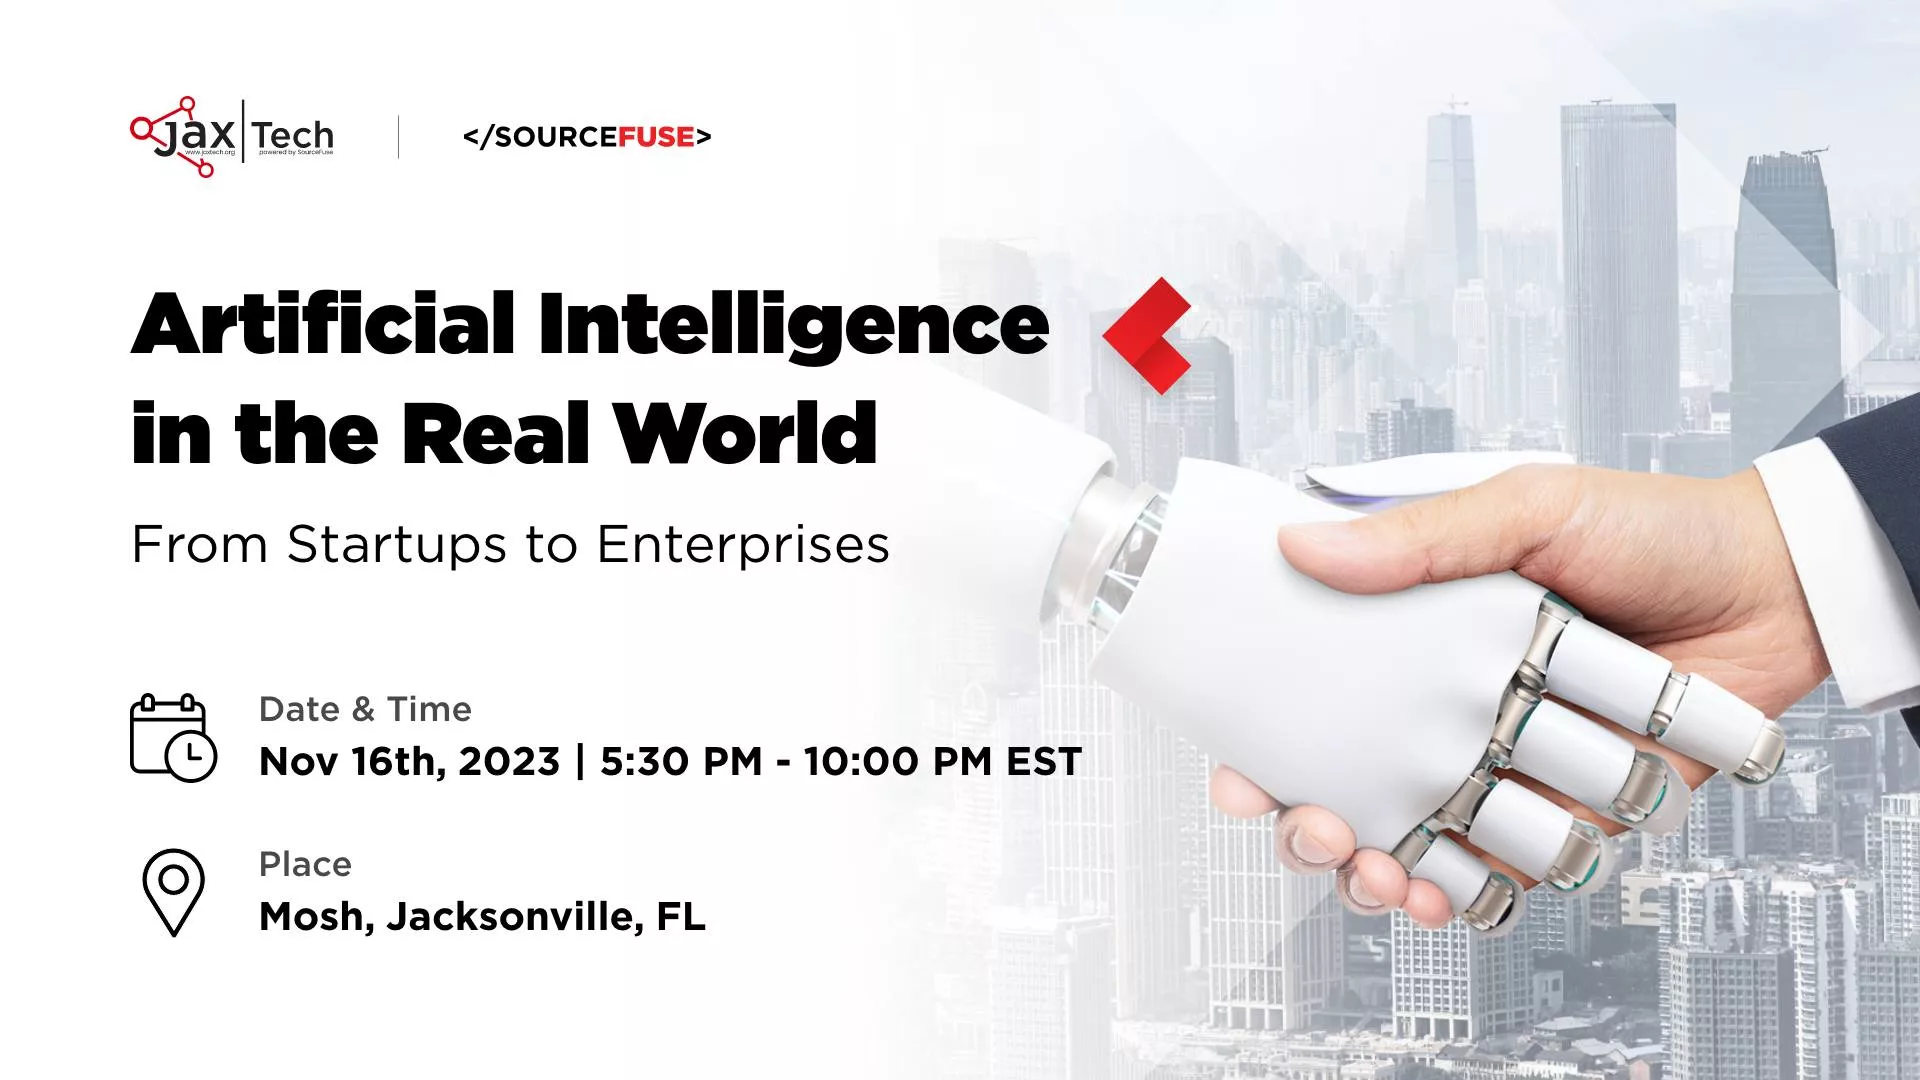 Artificial Intelligence in the Real World From Startups to Enterprises